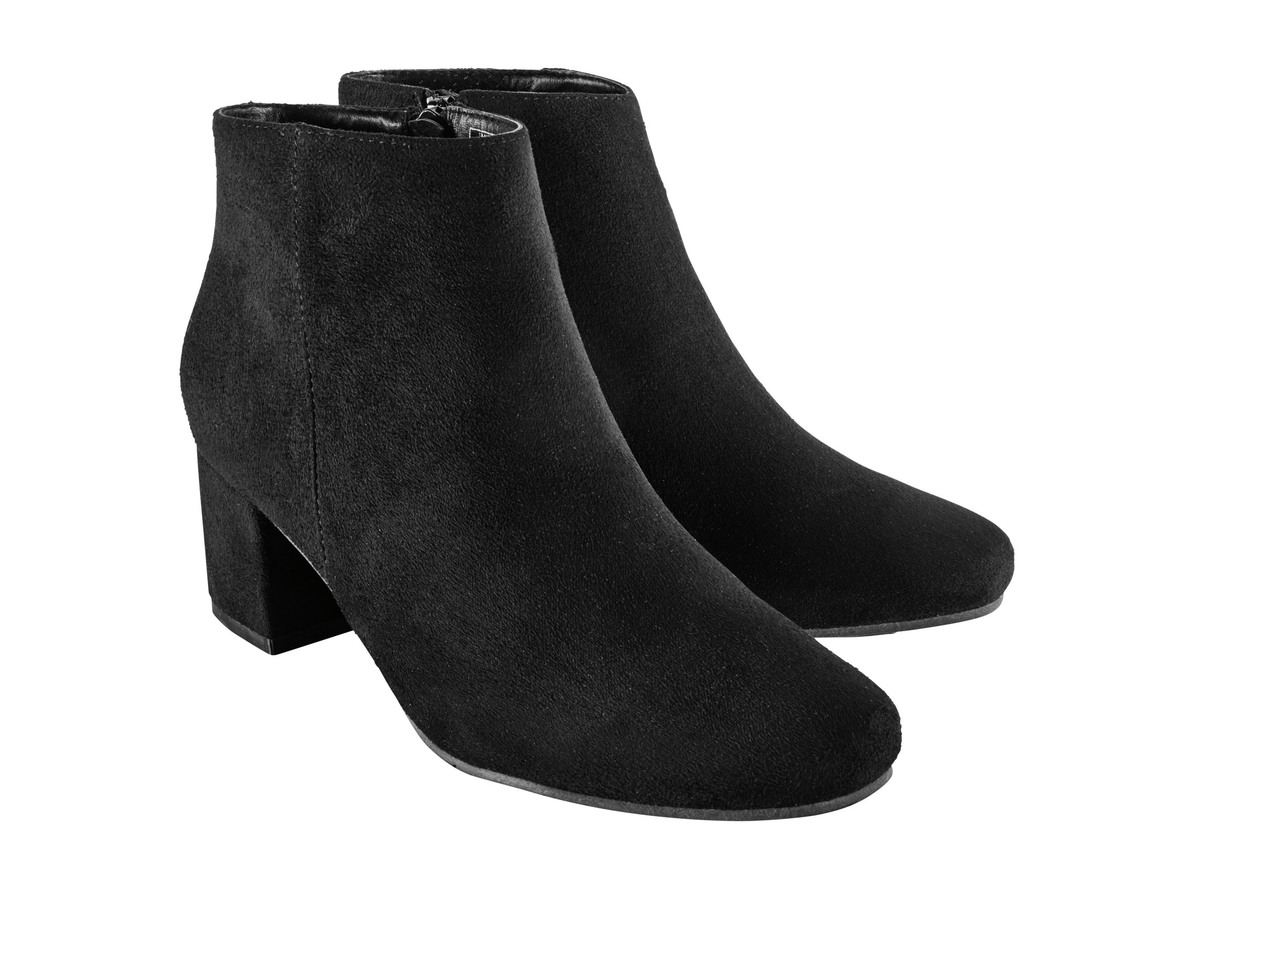 Ladies' Ankle Boots